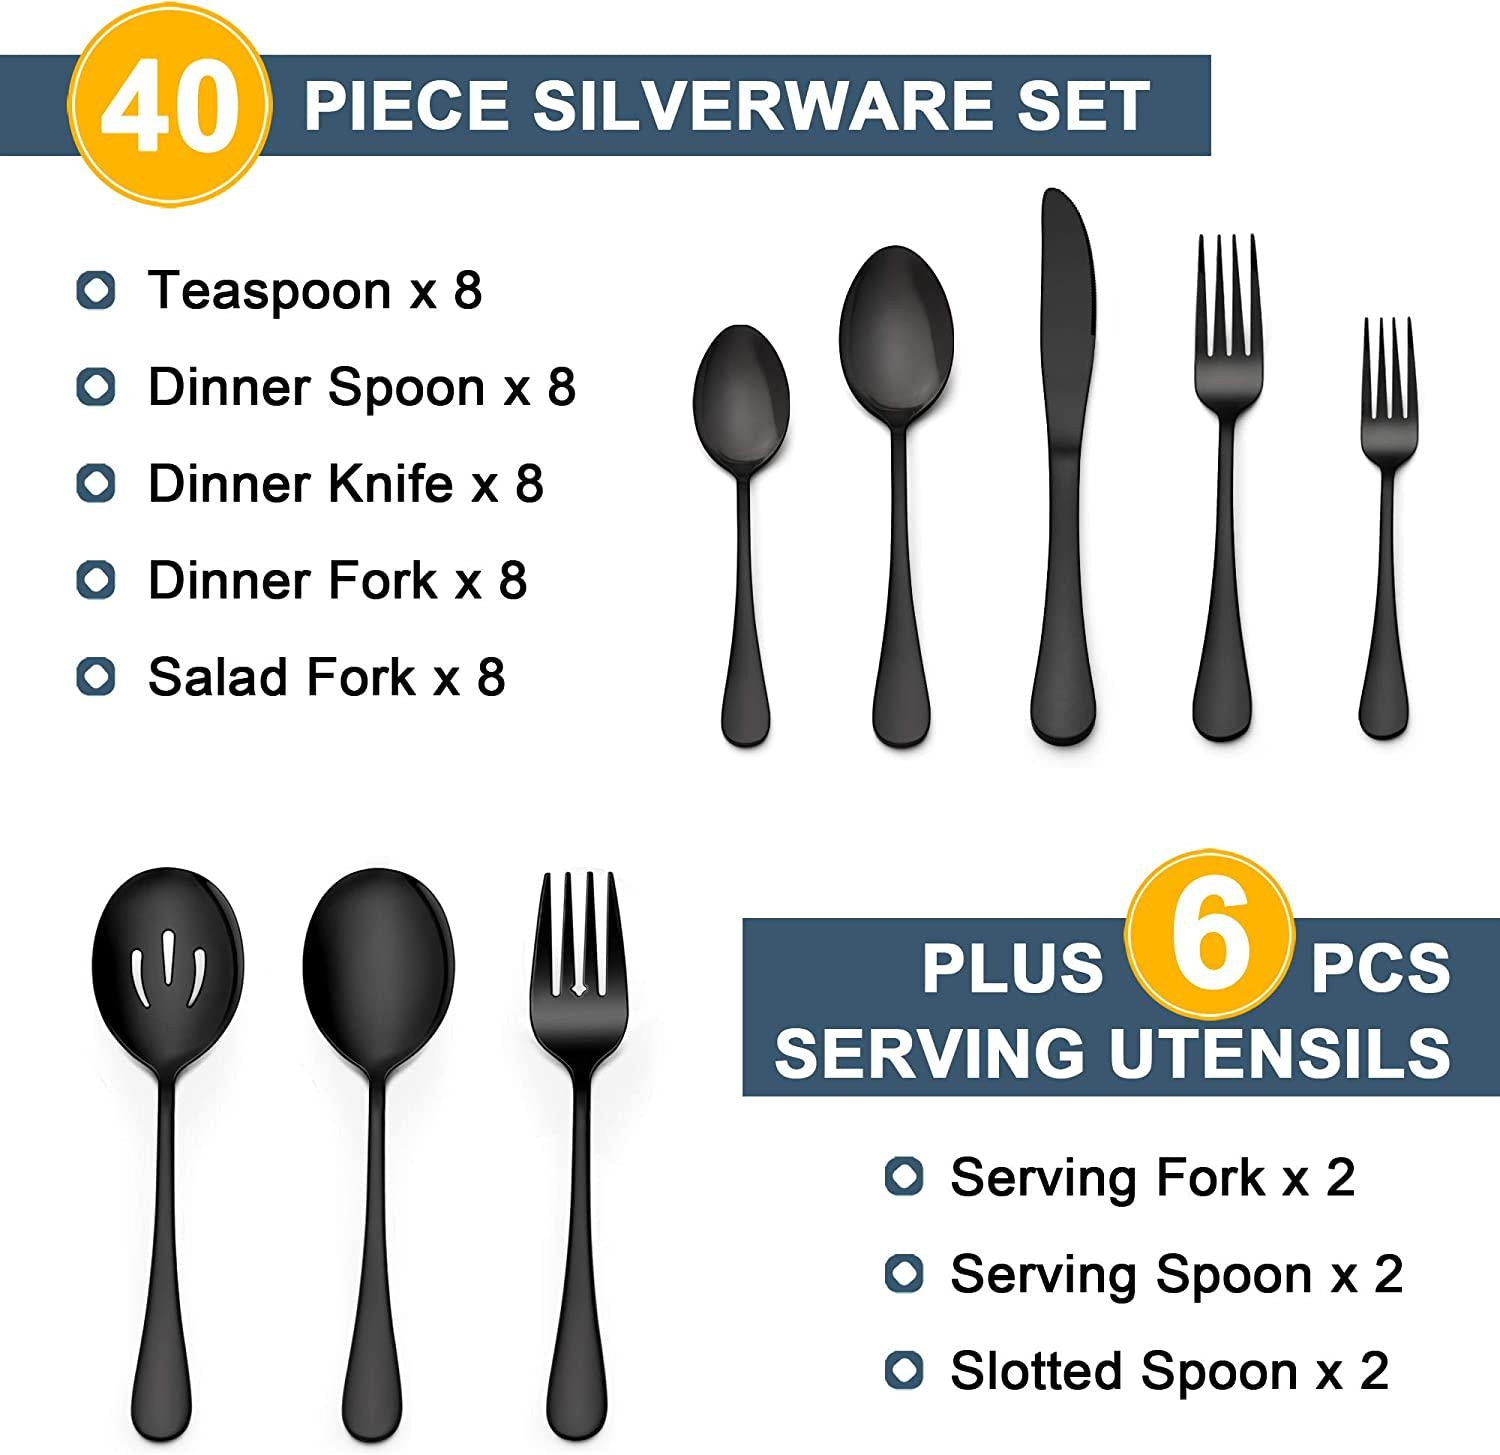 LIANYU, LIANYU 46-Piece Black Silverware Flatware Set for 8, Stainless Steel Flatware with Serving Utensils, Elegant Cutlery Tableware Includes Forks Spoons Knives, Mirror Polished